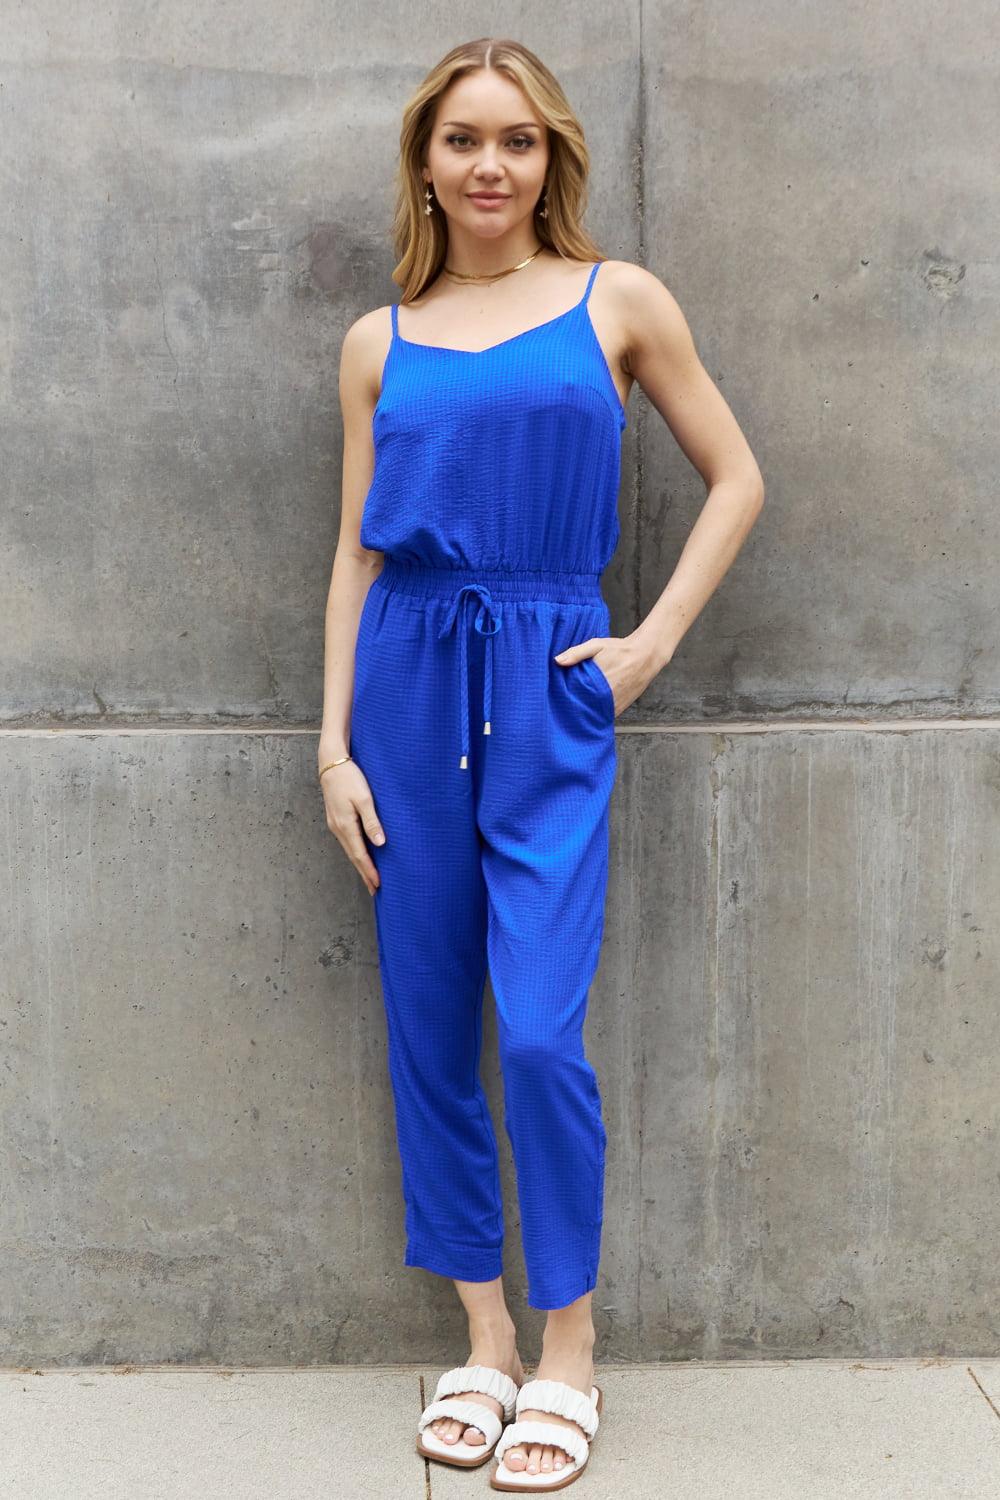 ODDI Full Size Textured Woven Jumpsuit in Royal Blue - The Fiery Jasmine